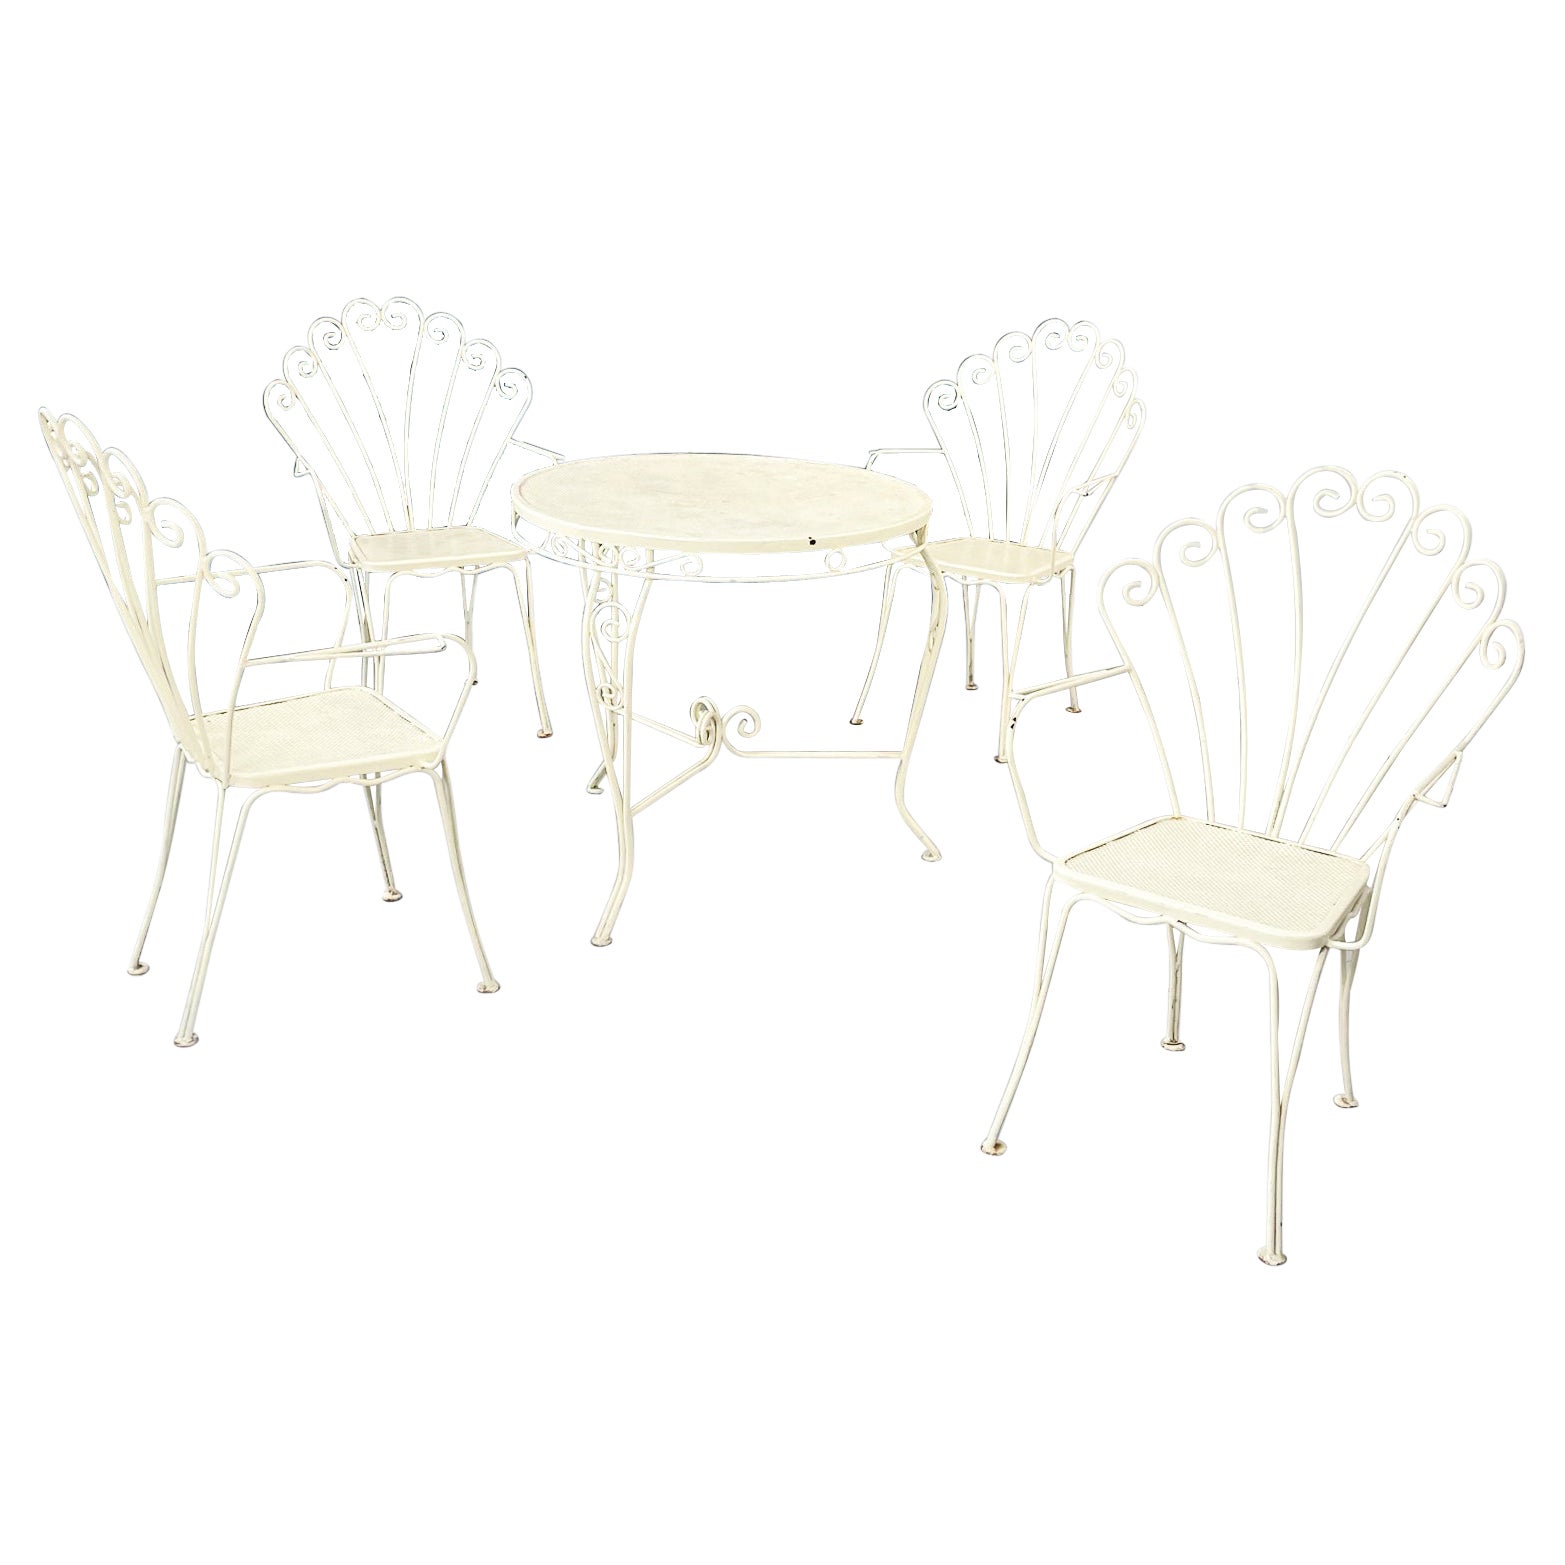 Italian Mid-Century Modern Garden Chairs and Table in White Wrought Iron, 1960s